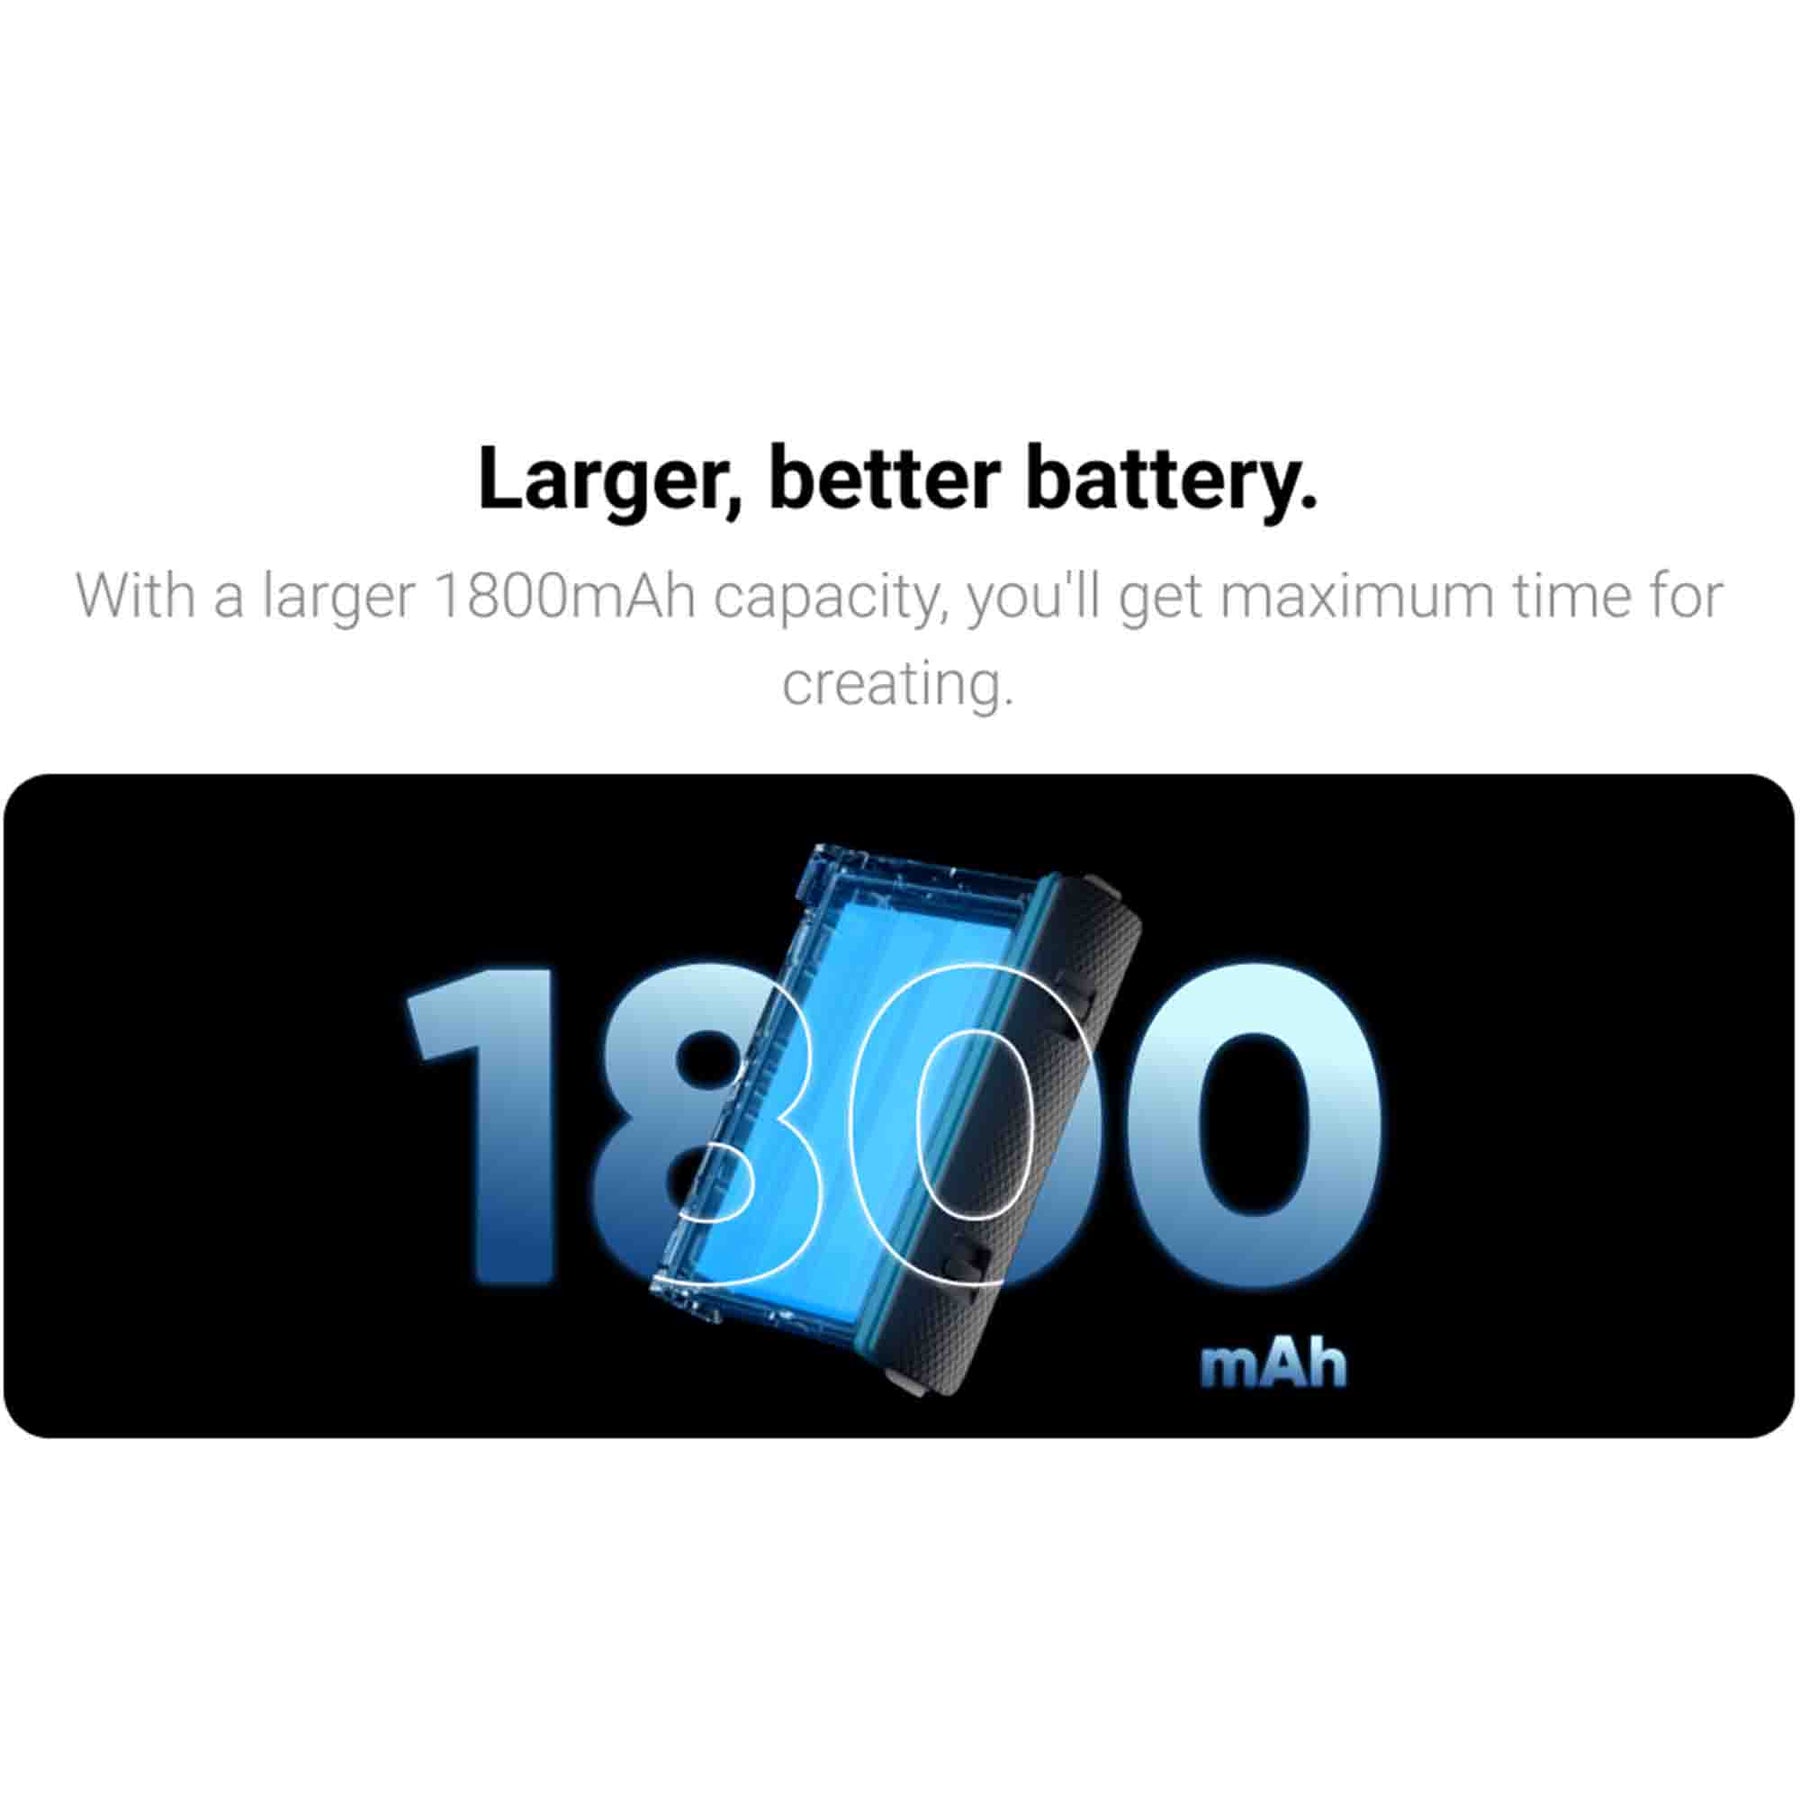 NBZZ 2 Packs 360 X3 Batteries with Charger Hub for Insta 360 ONE X3 Battery  1800mAh Insta 360 x3 Accessories with Misro SD Card Slots (Battery Charger